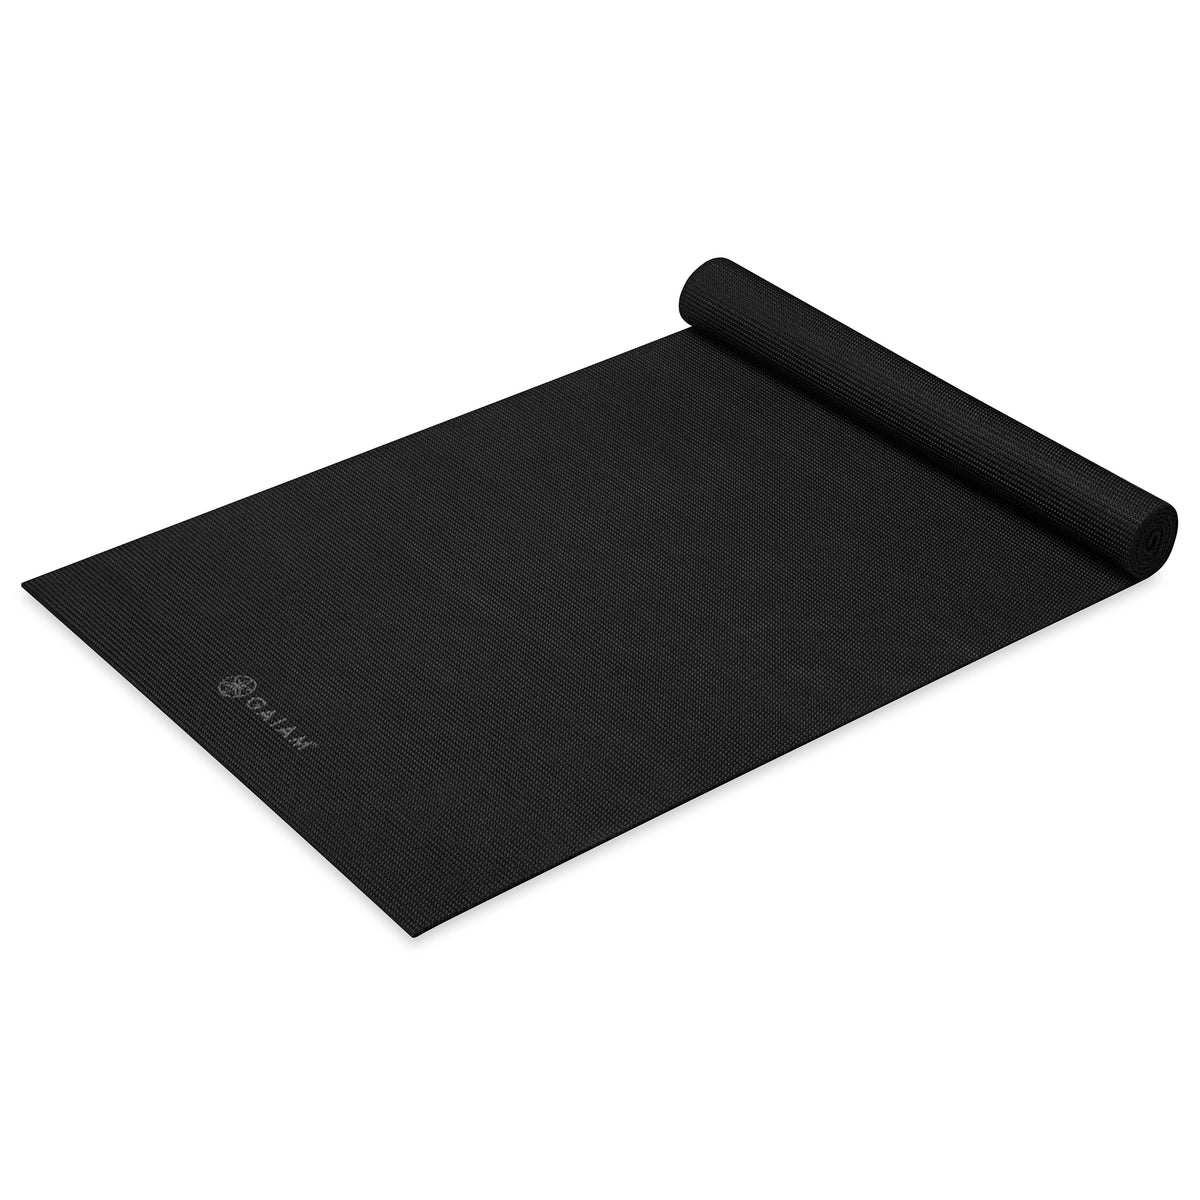 Gaiam Classic Solid Color Yoga Mat (5mm) Black top rolled angle